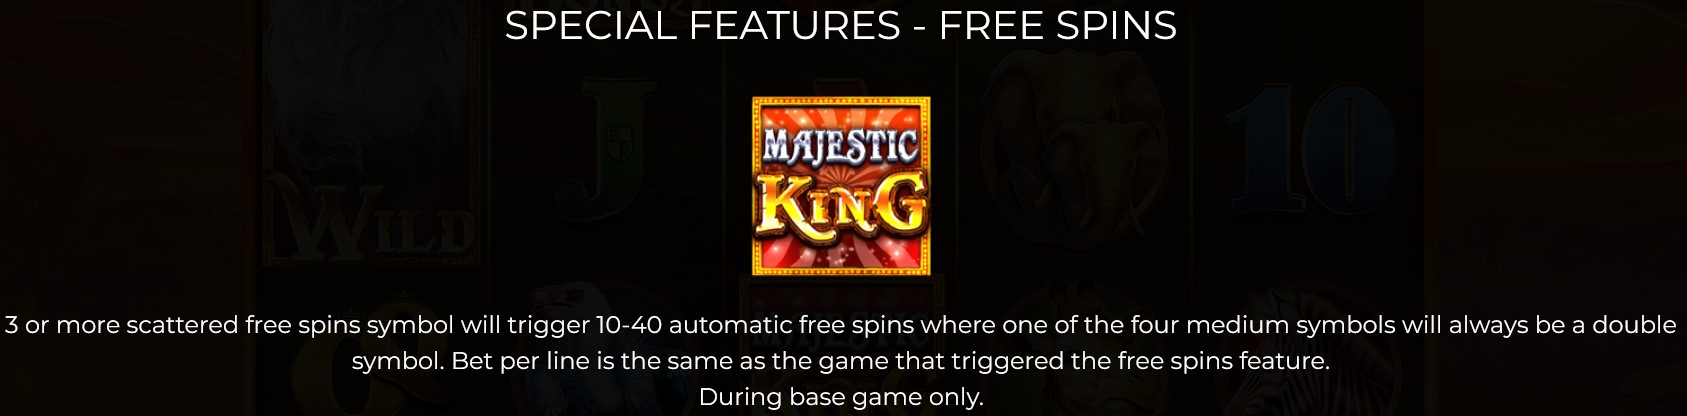 Majestic King Free Spins 2